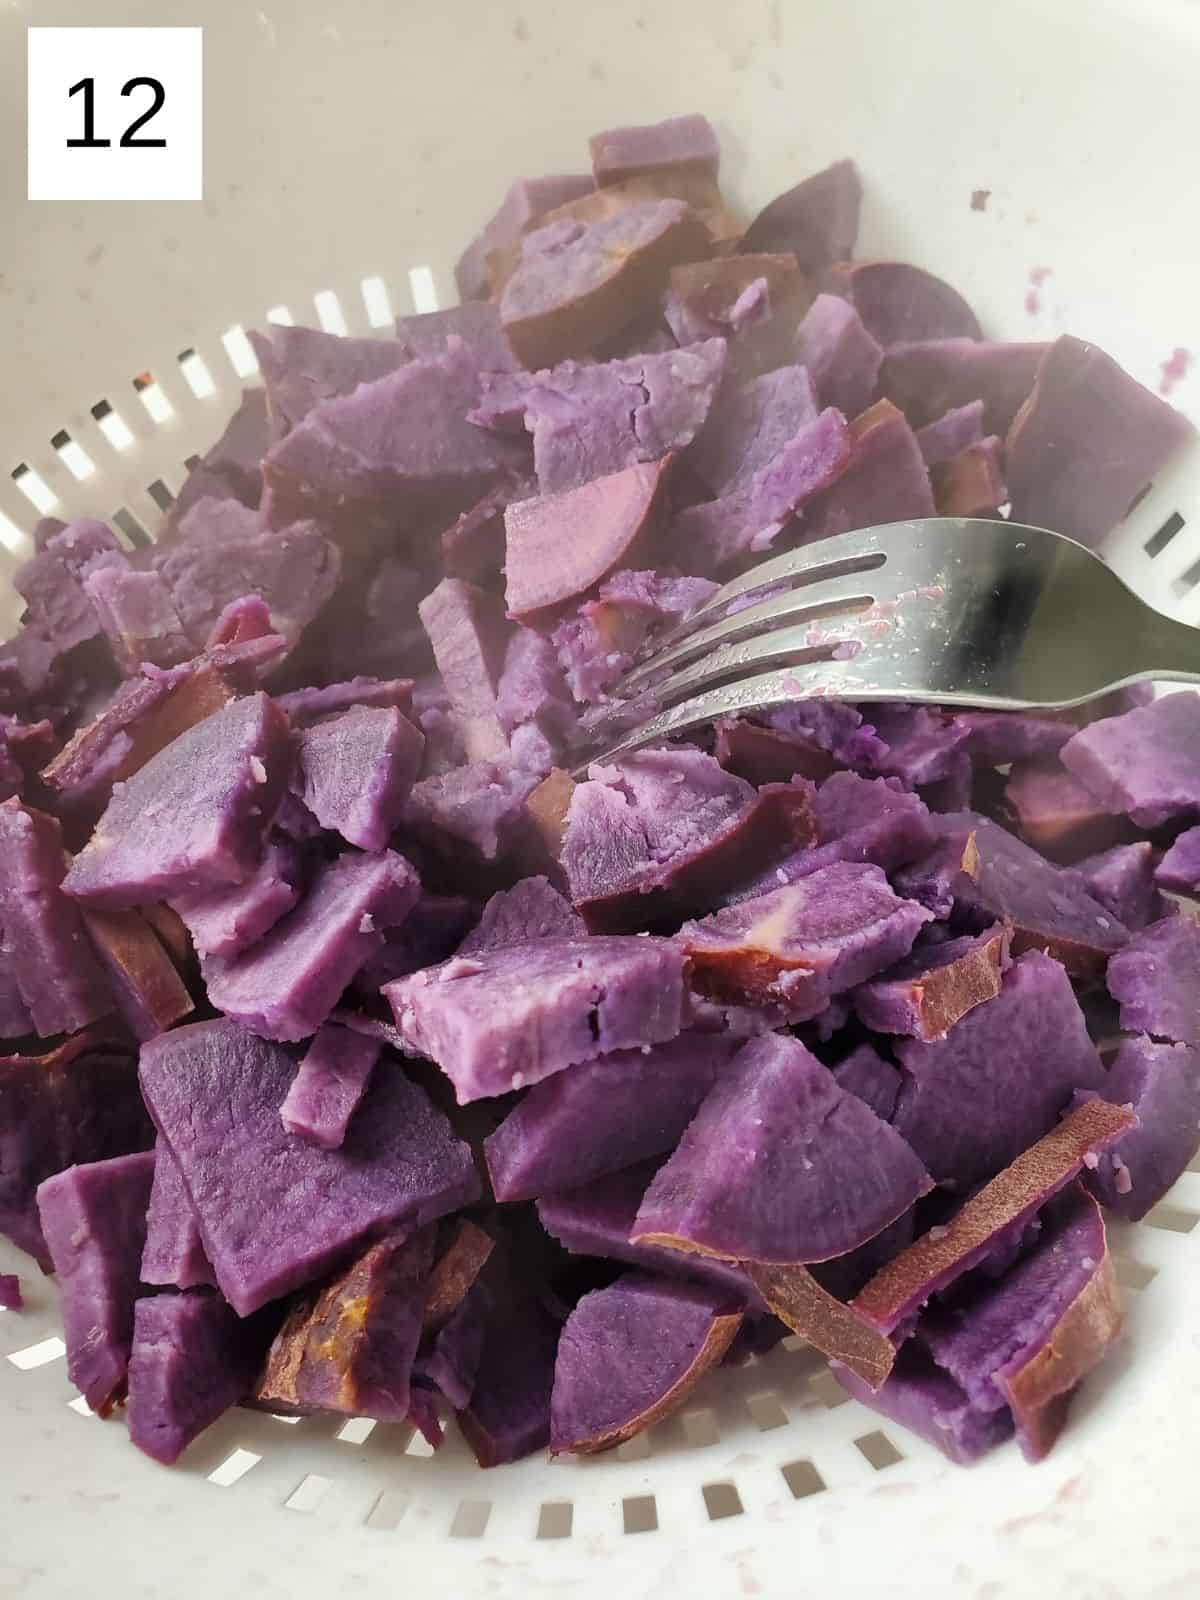 draining the cooked and softened pieces of purple sweet potatoes on a white strainer.